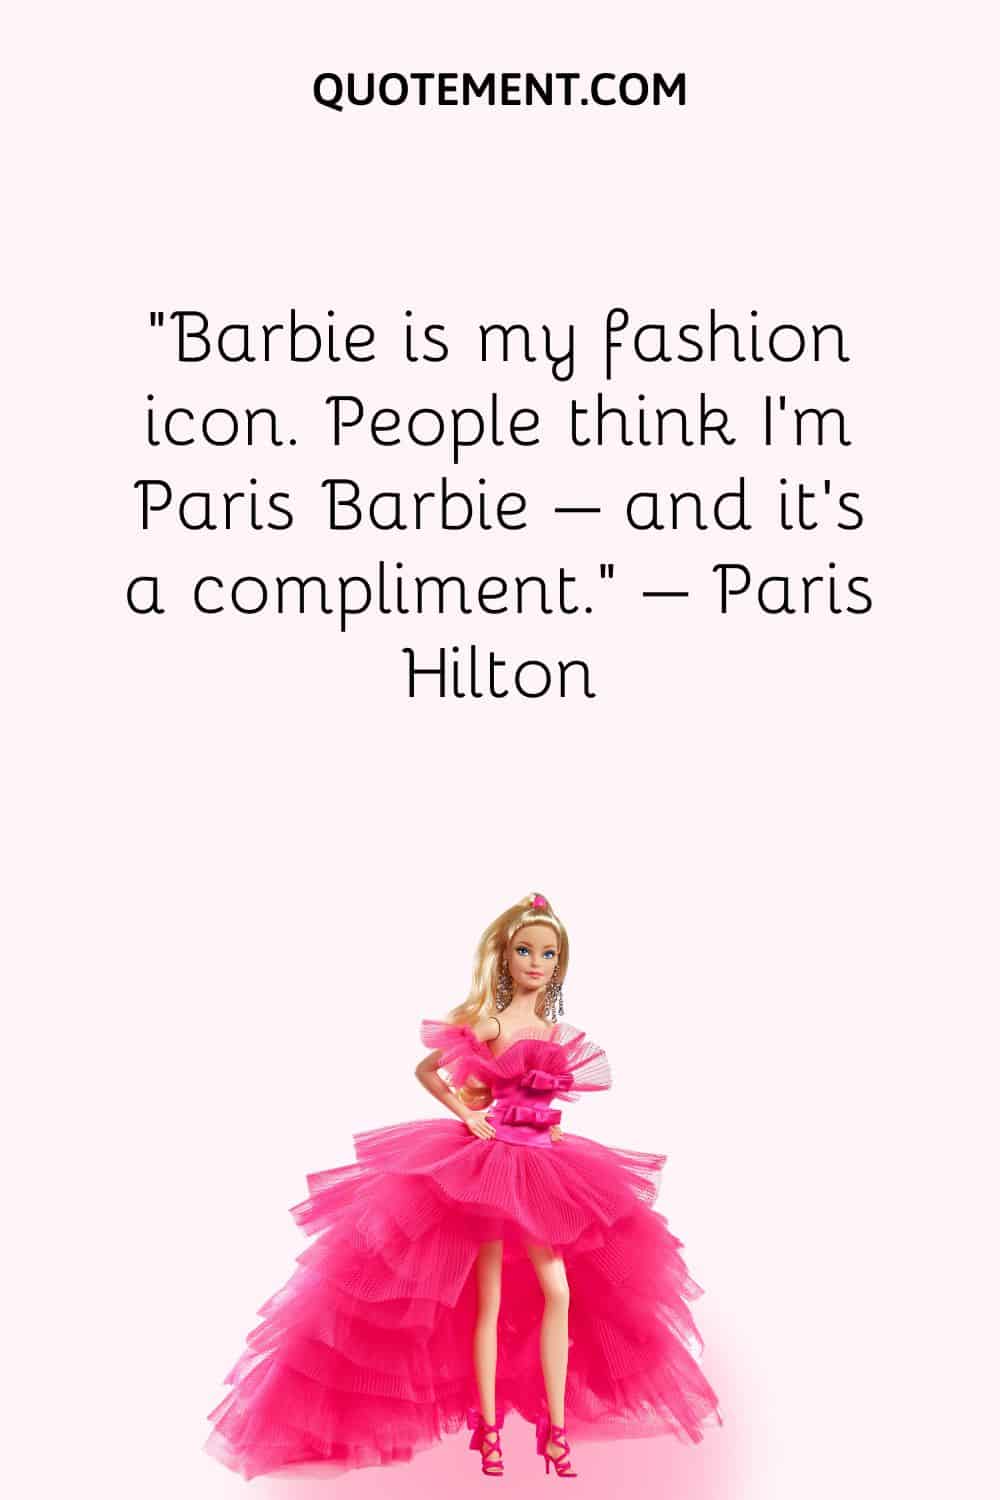 Barbie is my fashion icon. People think I'm Paris Barbie – and it's a compliment